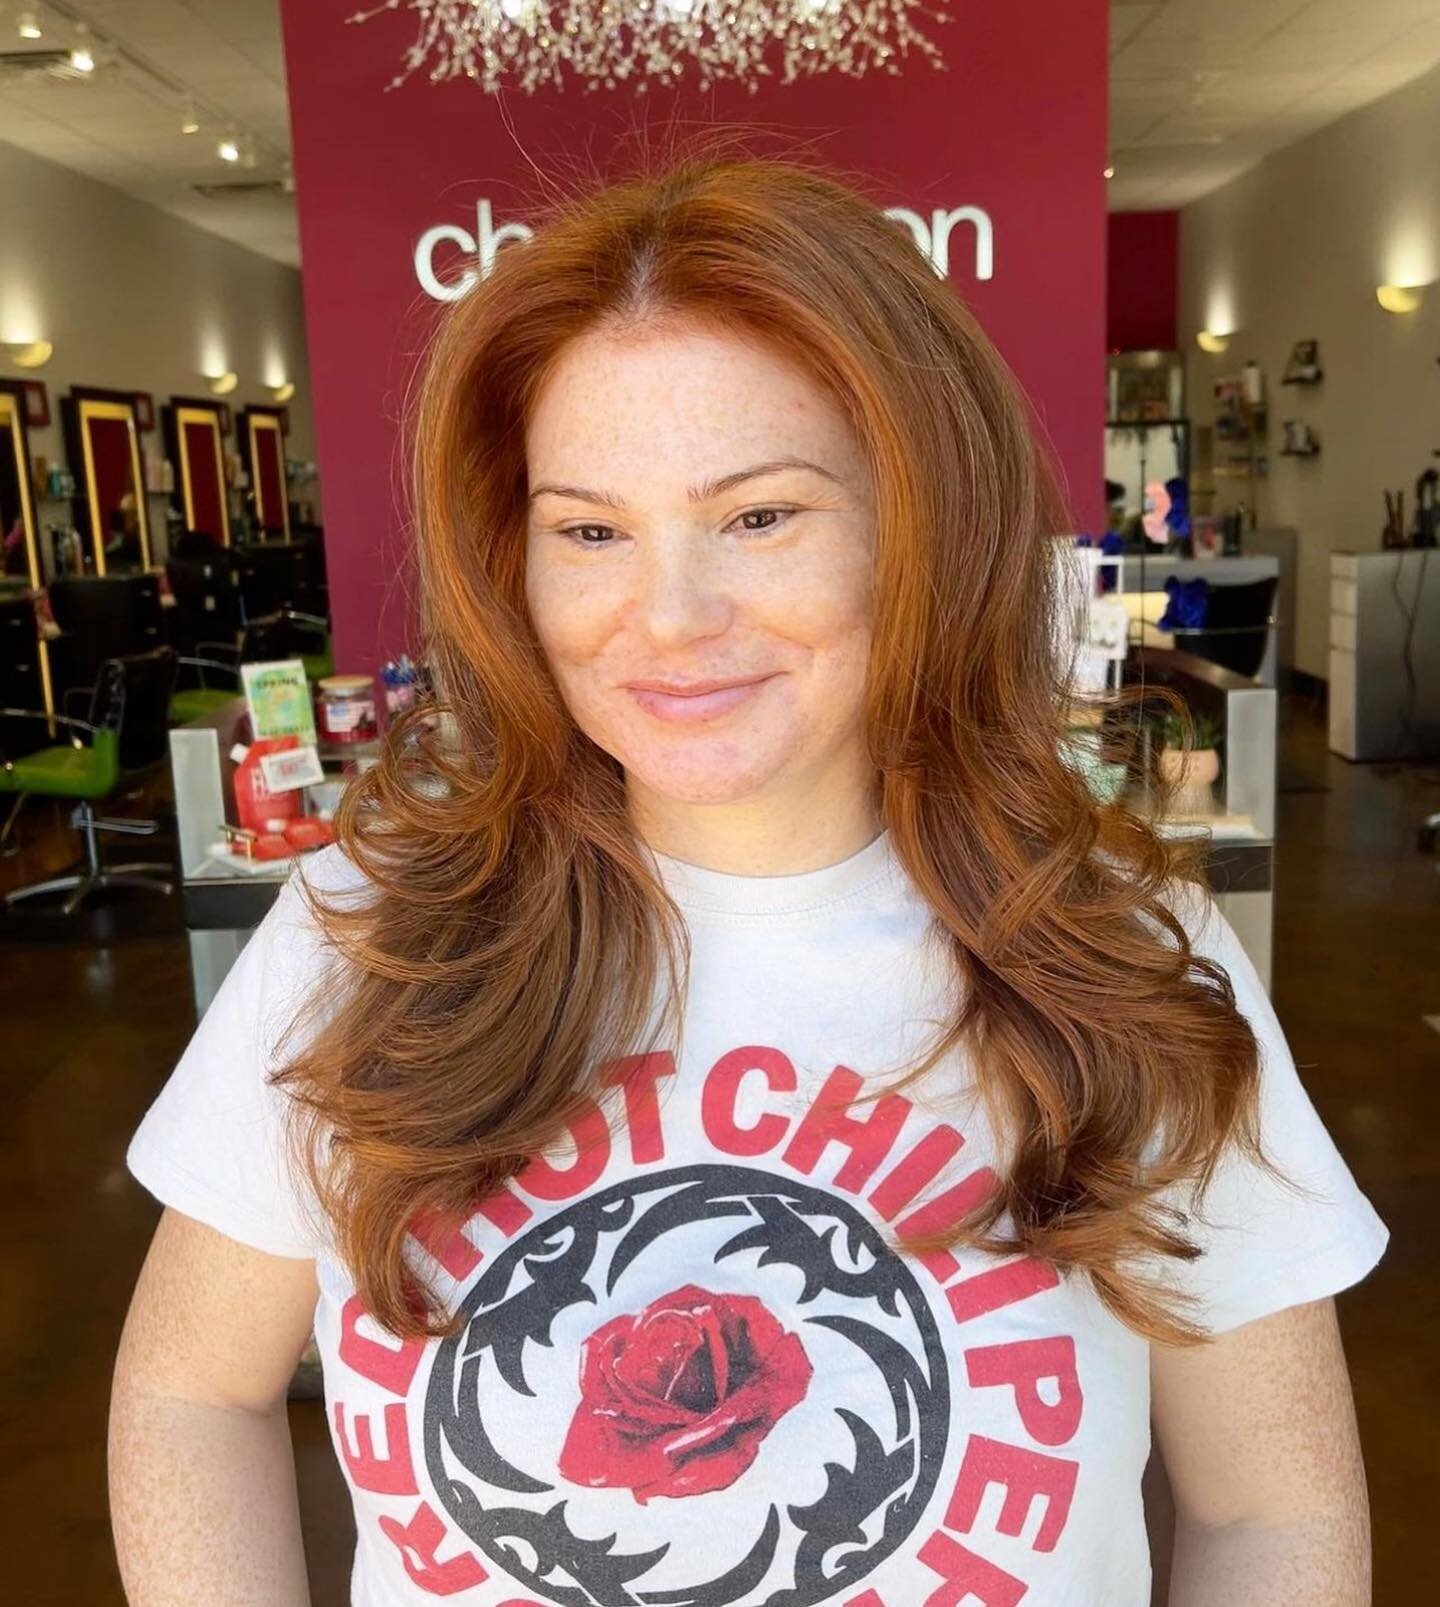 Another gorgeous gorgeous lady! Hair by @corinne.chameleon.bridal 

#clarksvilleredhead #clarkavillehair #clarksvillehairstylist #clarksvillesalon #clarkavillesalon